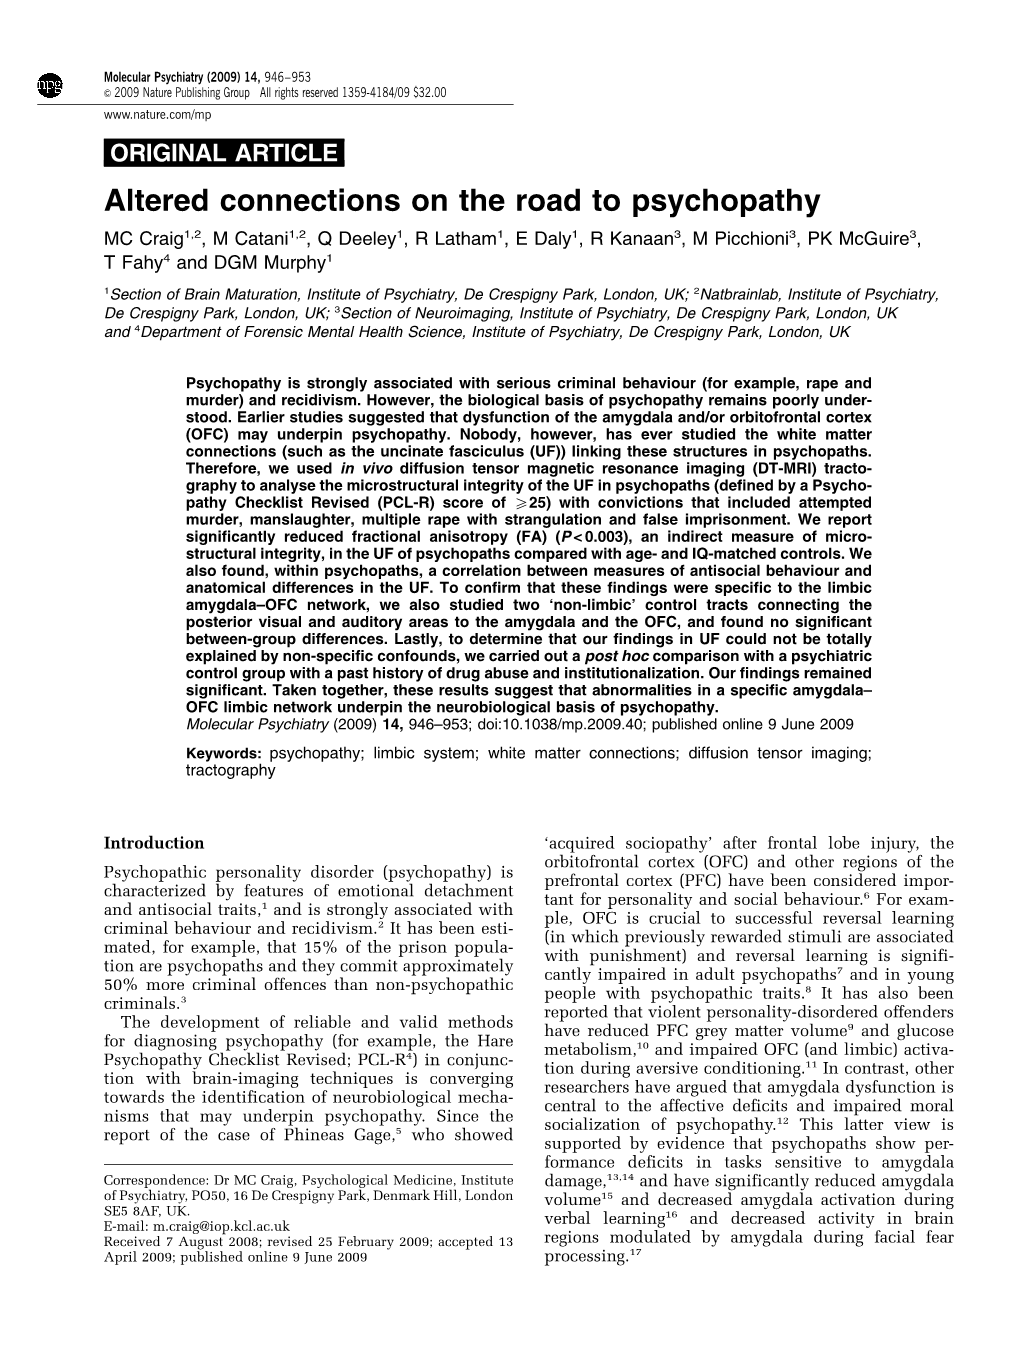 Altered Connections on the Road to Psychopathy